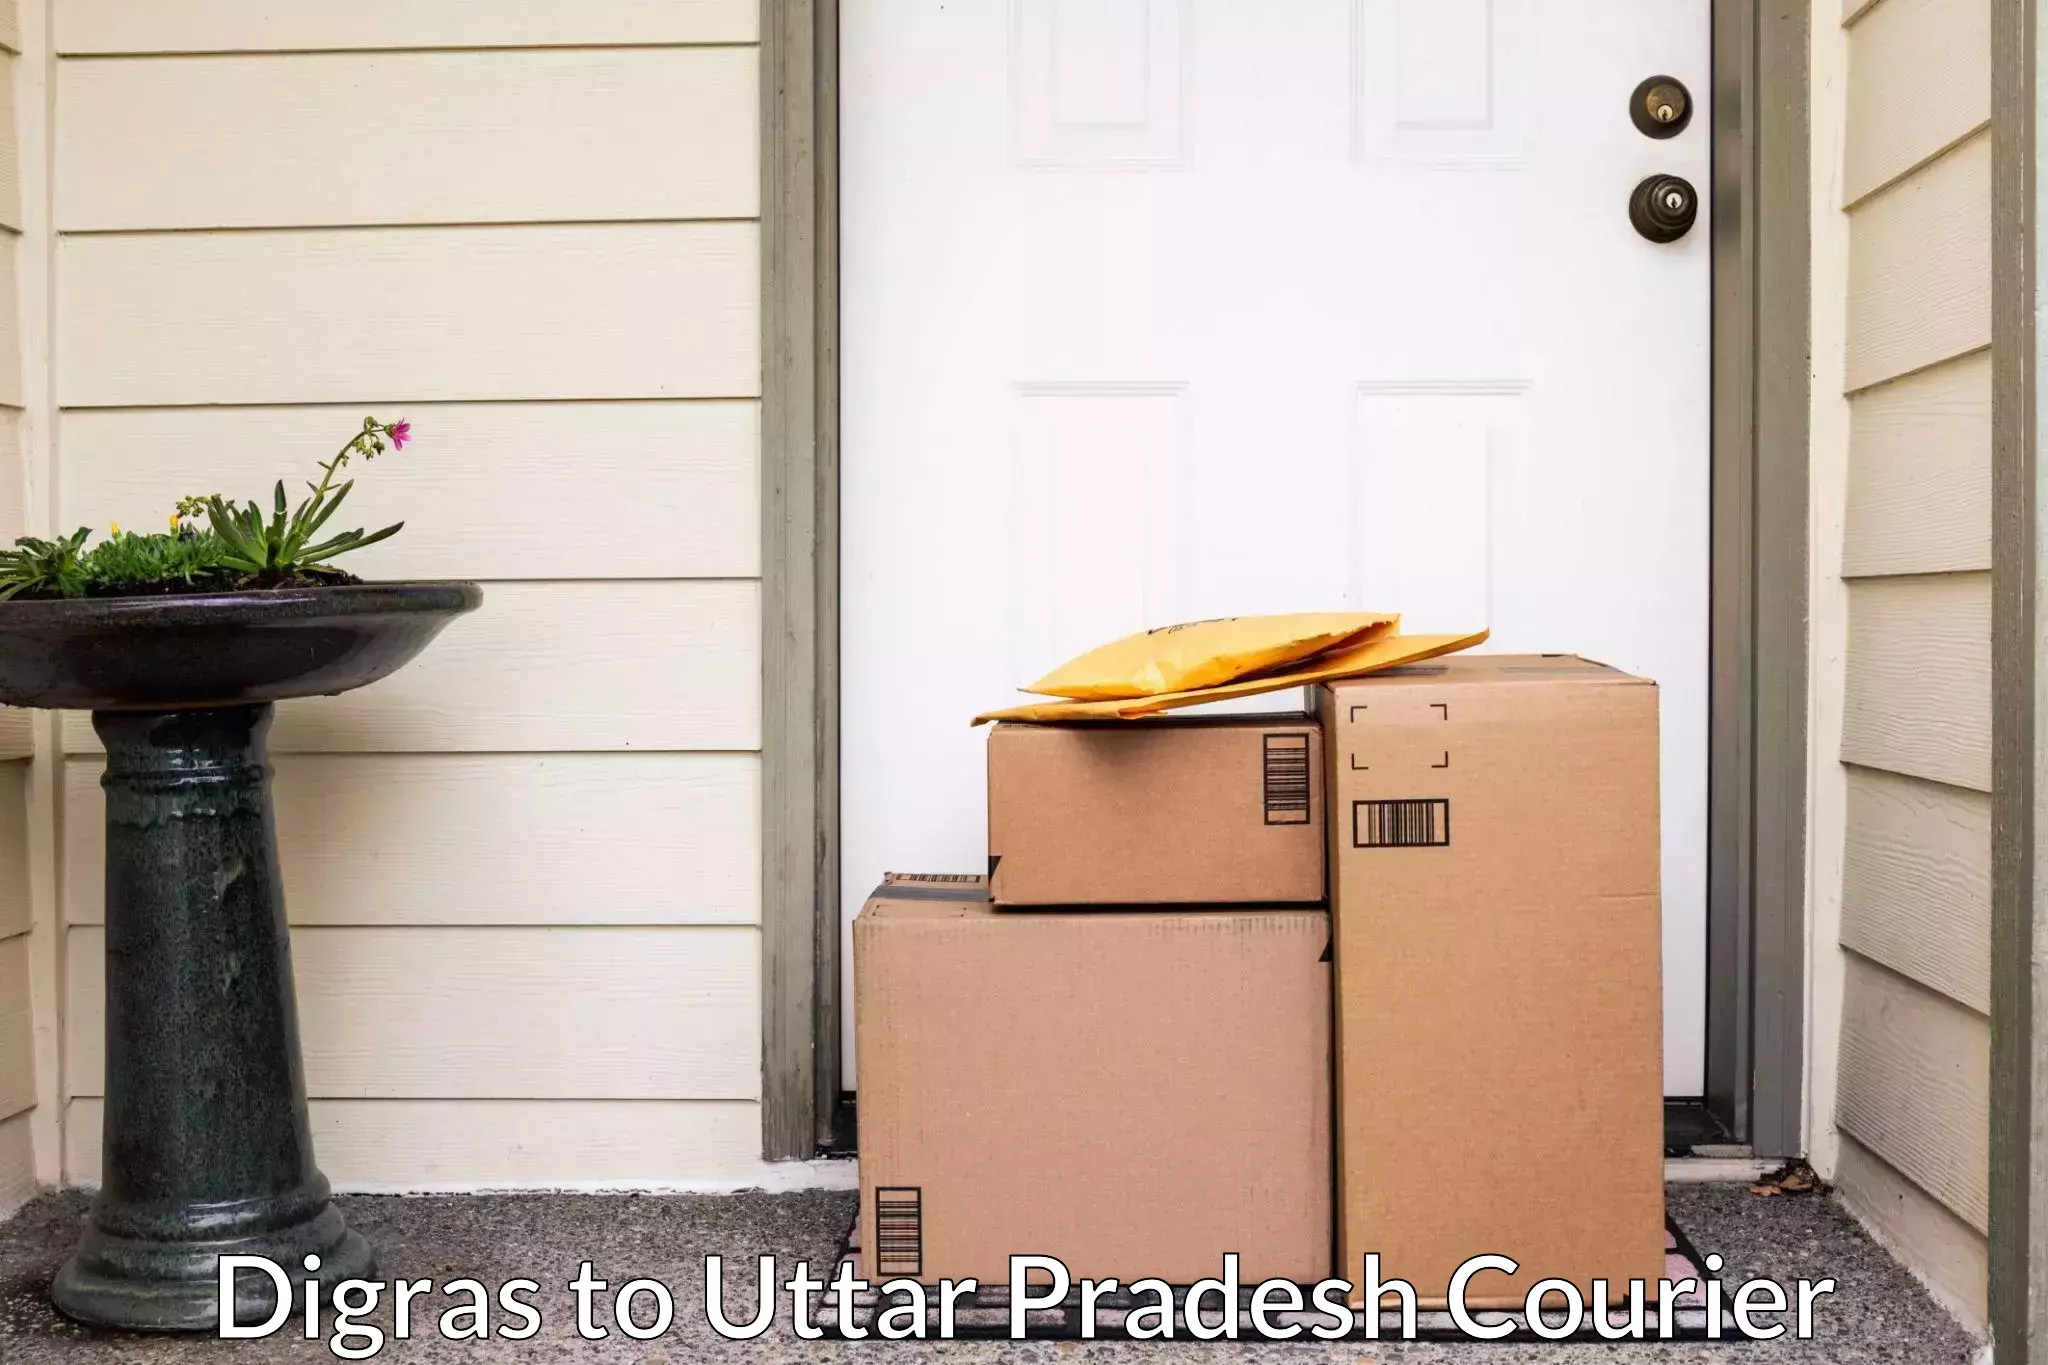 Hassle-free relocation Digras to Noida